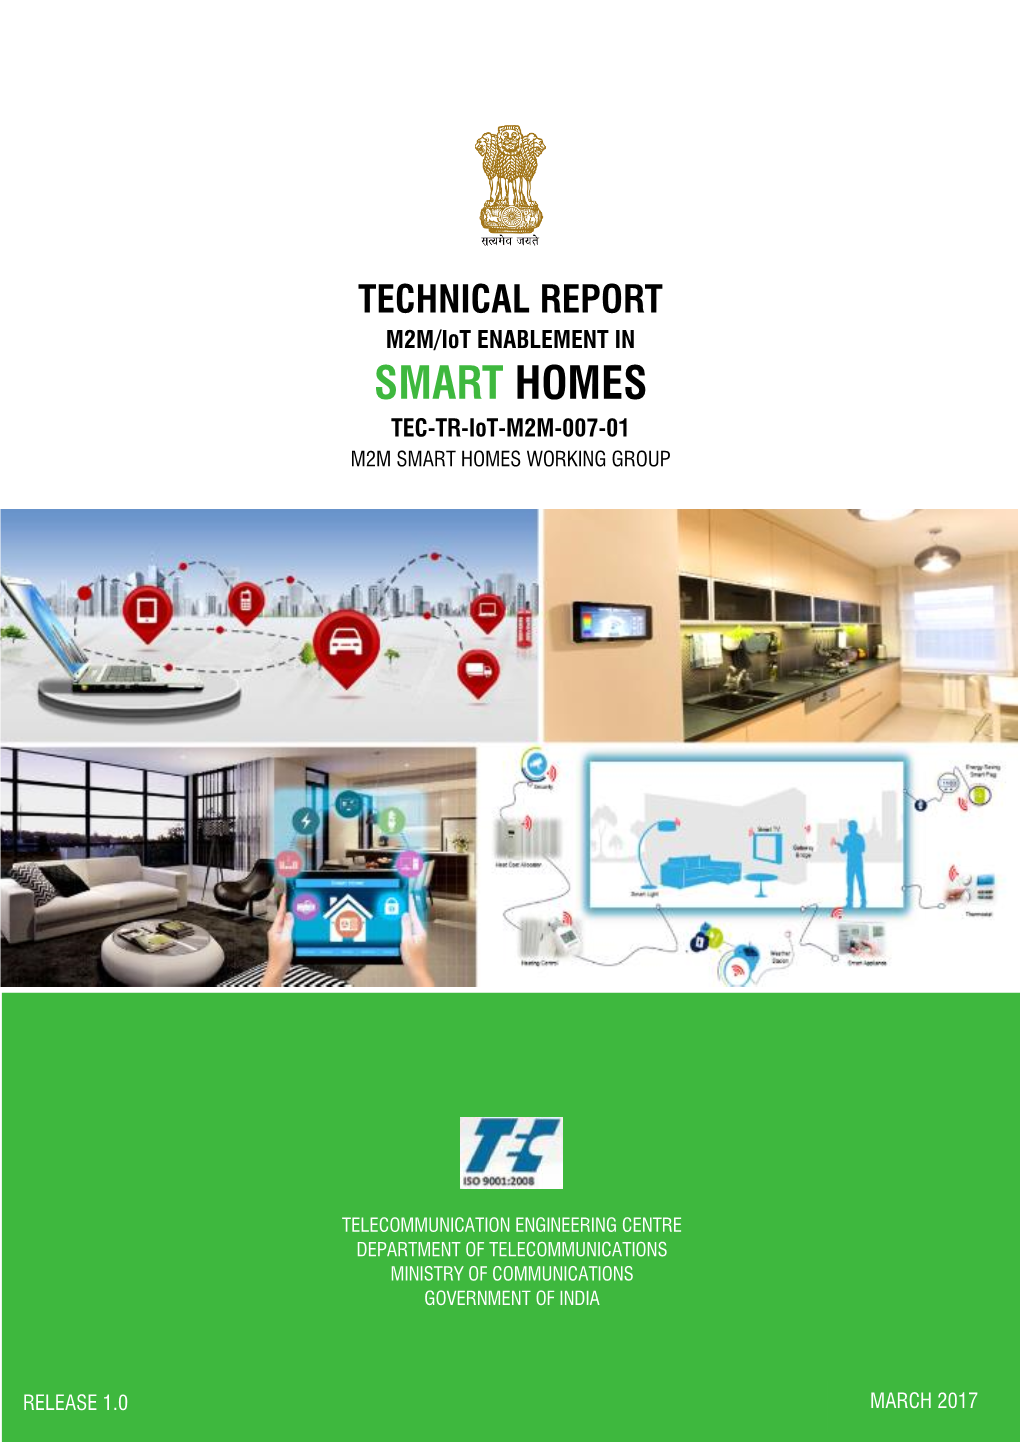 TECHNICAL REPORT M2M/Iot ENABLEMENT in SMART HOMES TEC-TR-Iot-M2M-007-01 M2M SMART HOMES WORKING GROUP